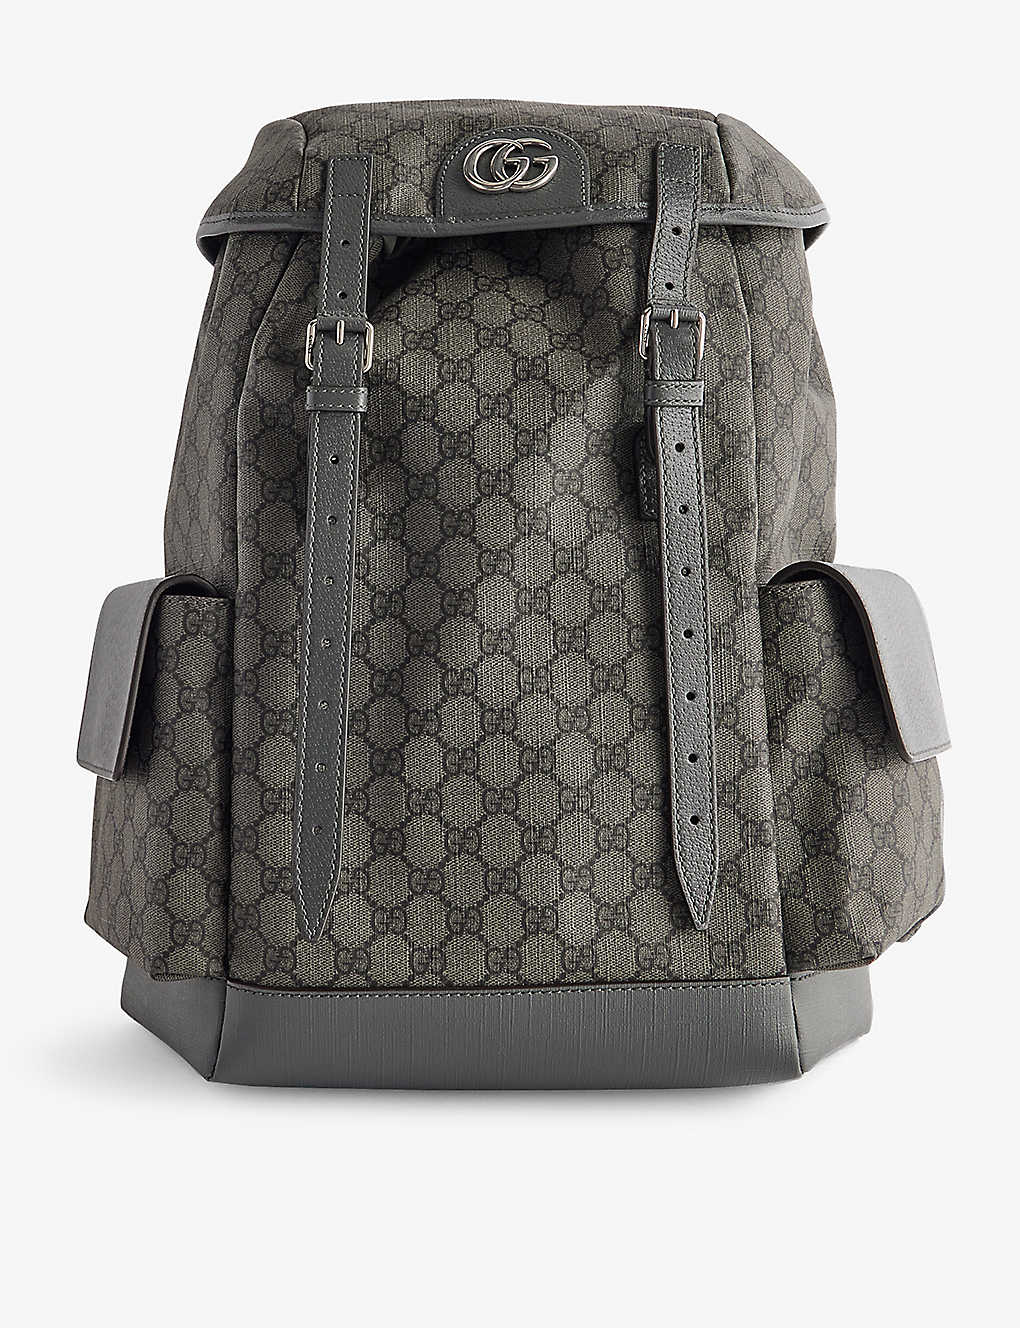 Gucci Gg Supreme Canvas Backpack In Grey Blk/grap.gr/blk